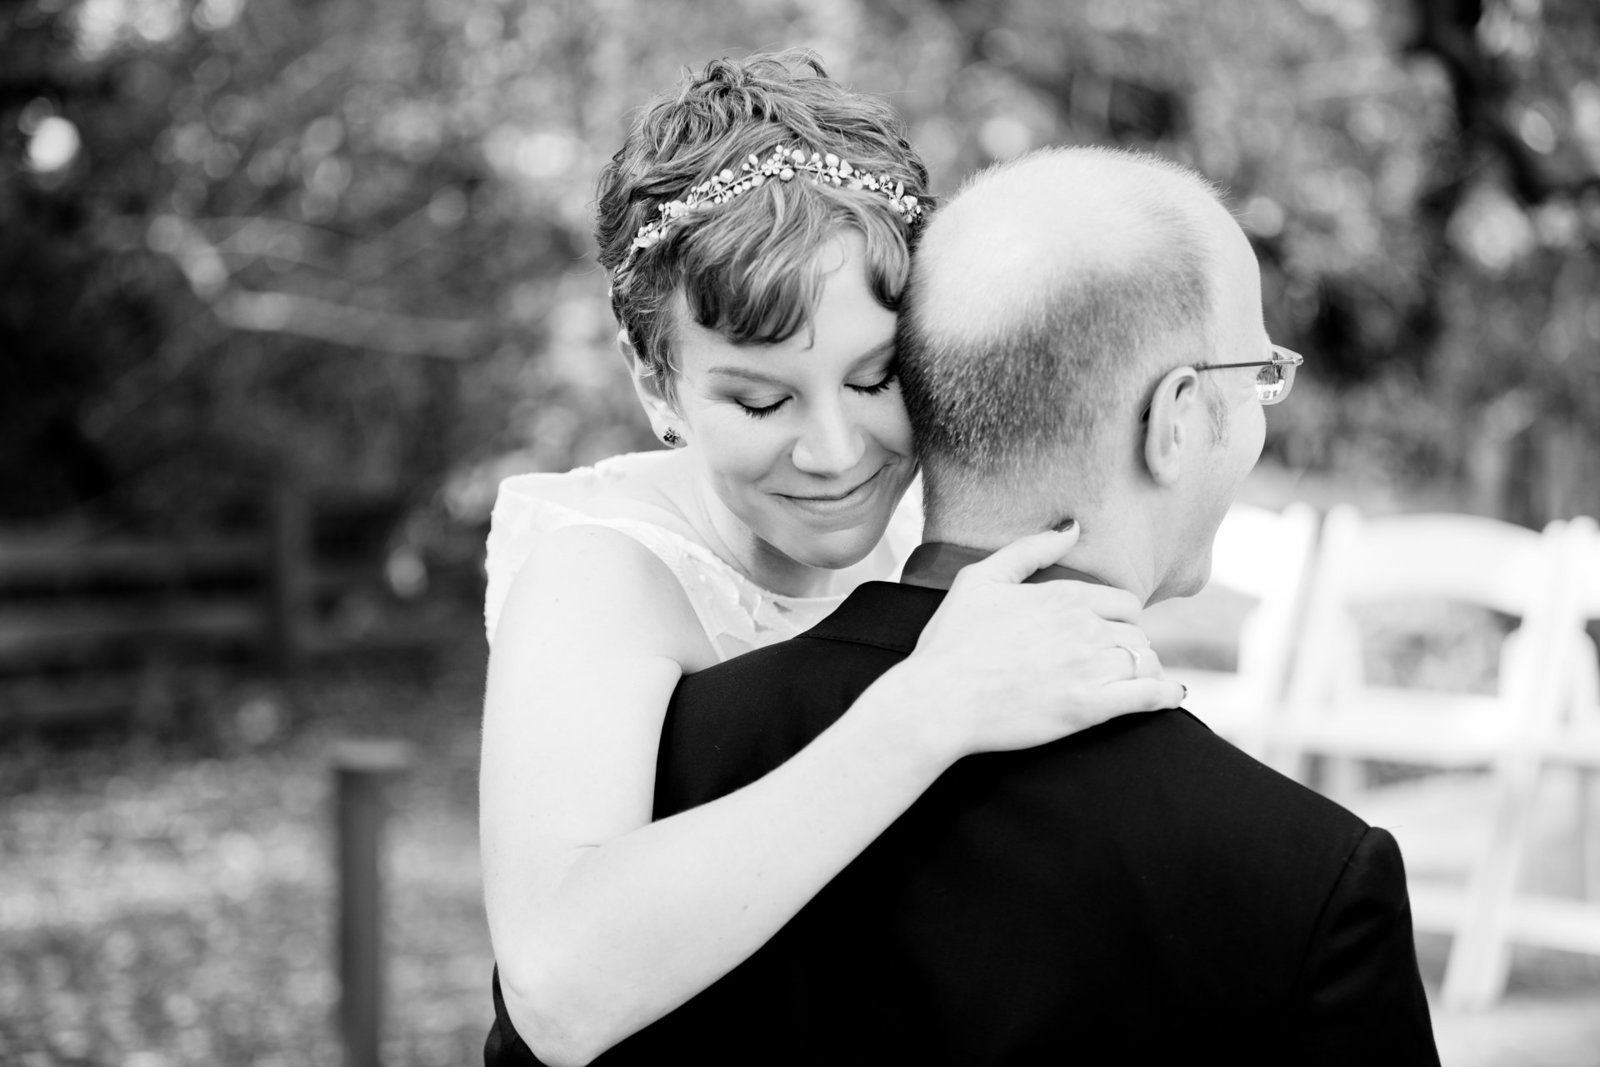 Bride and groom hug in romantic black and white portrait